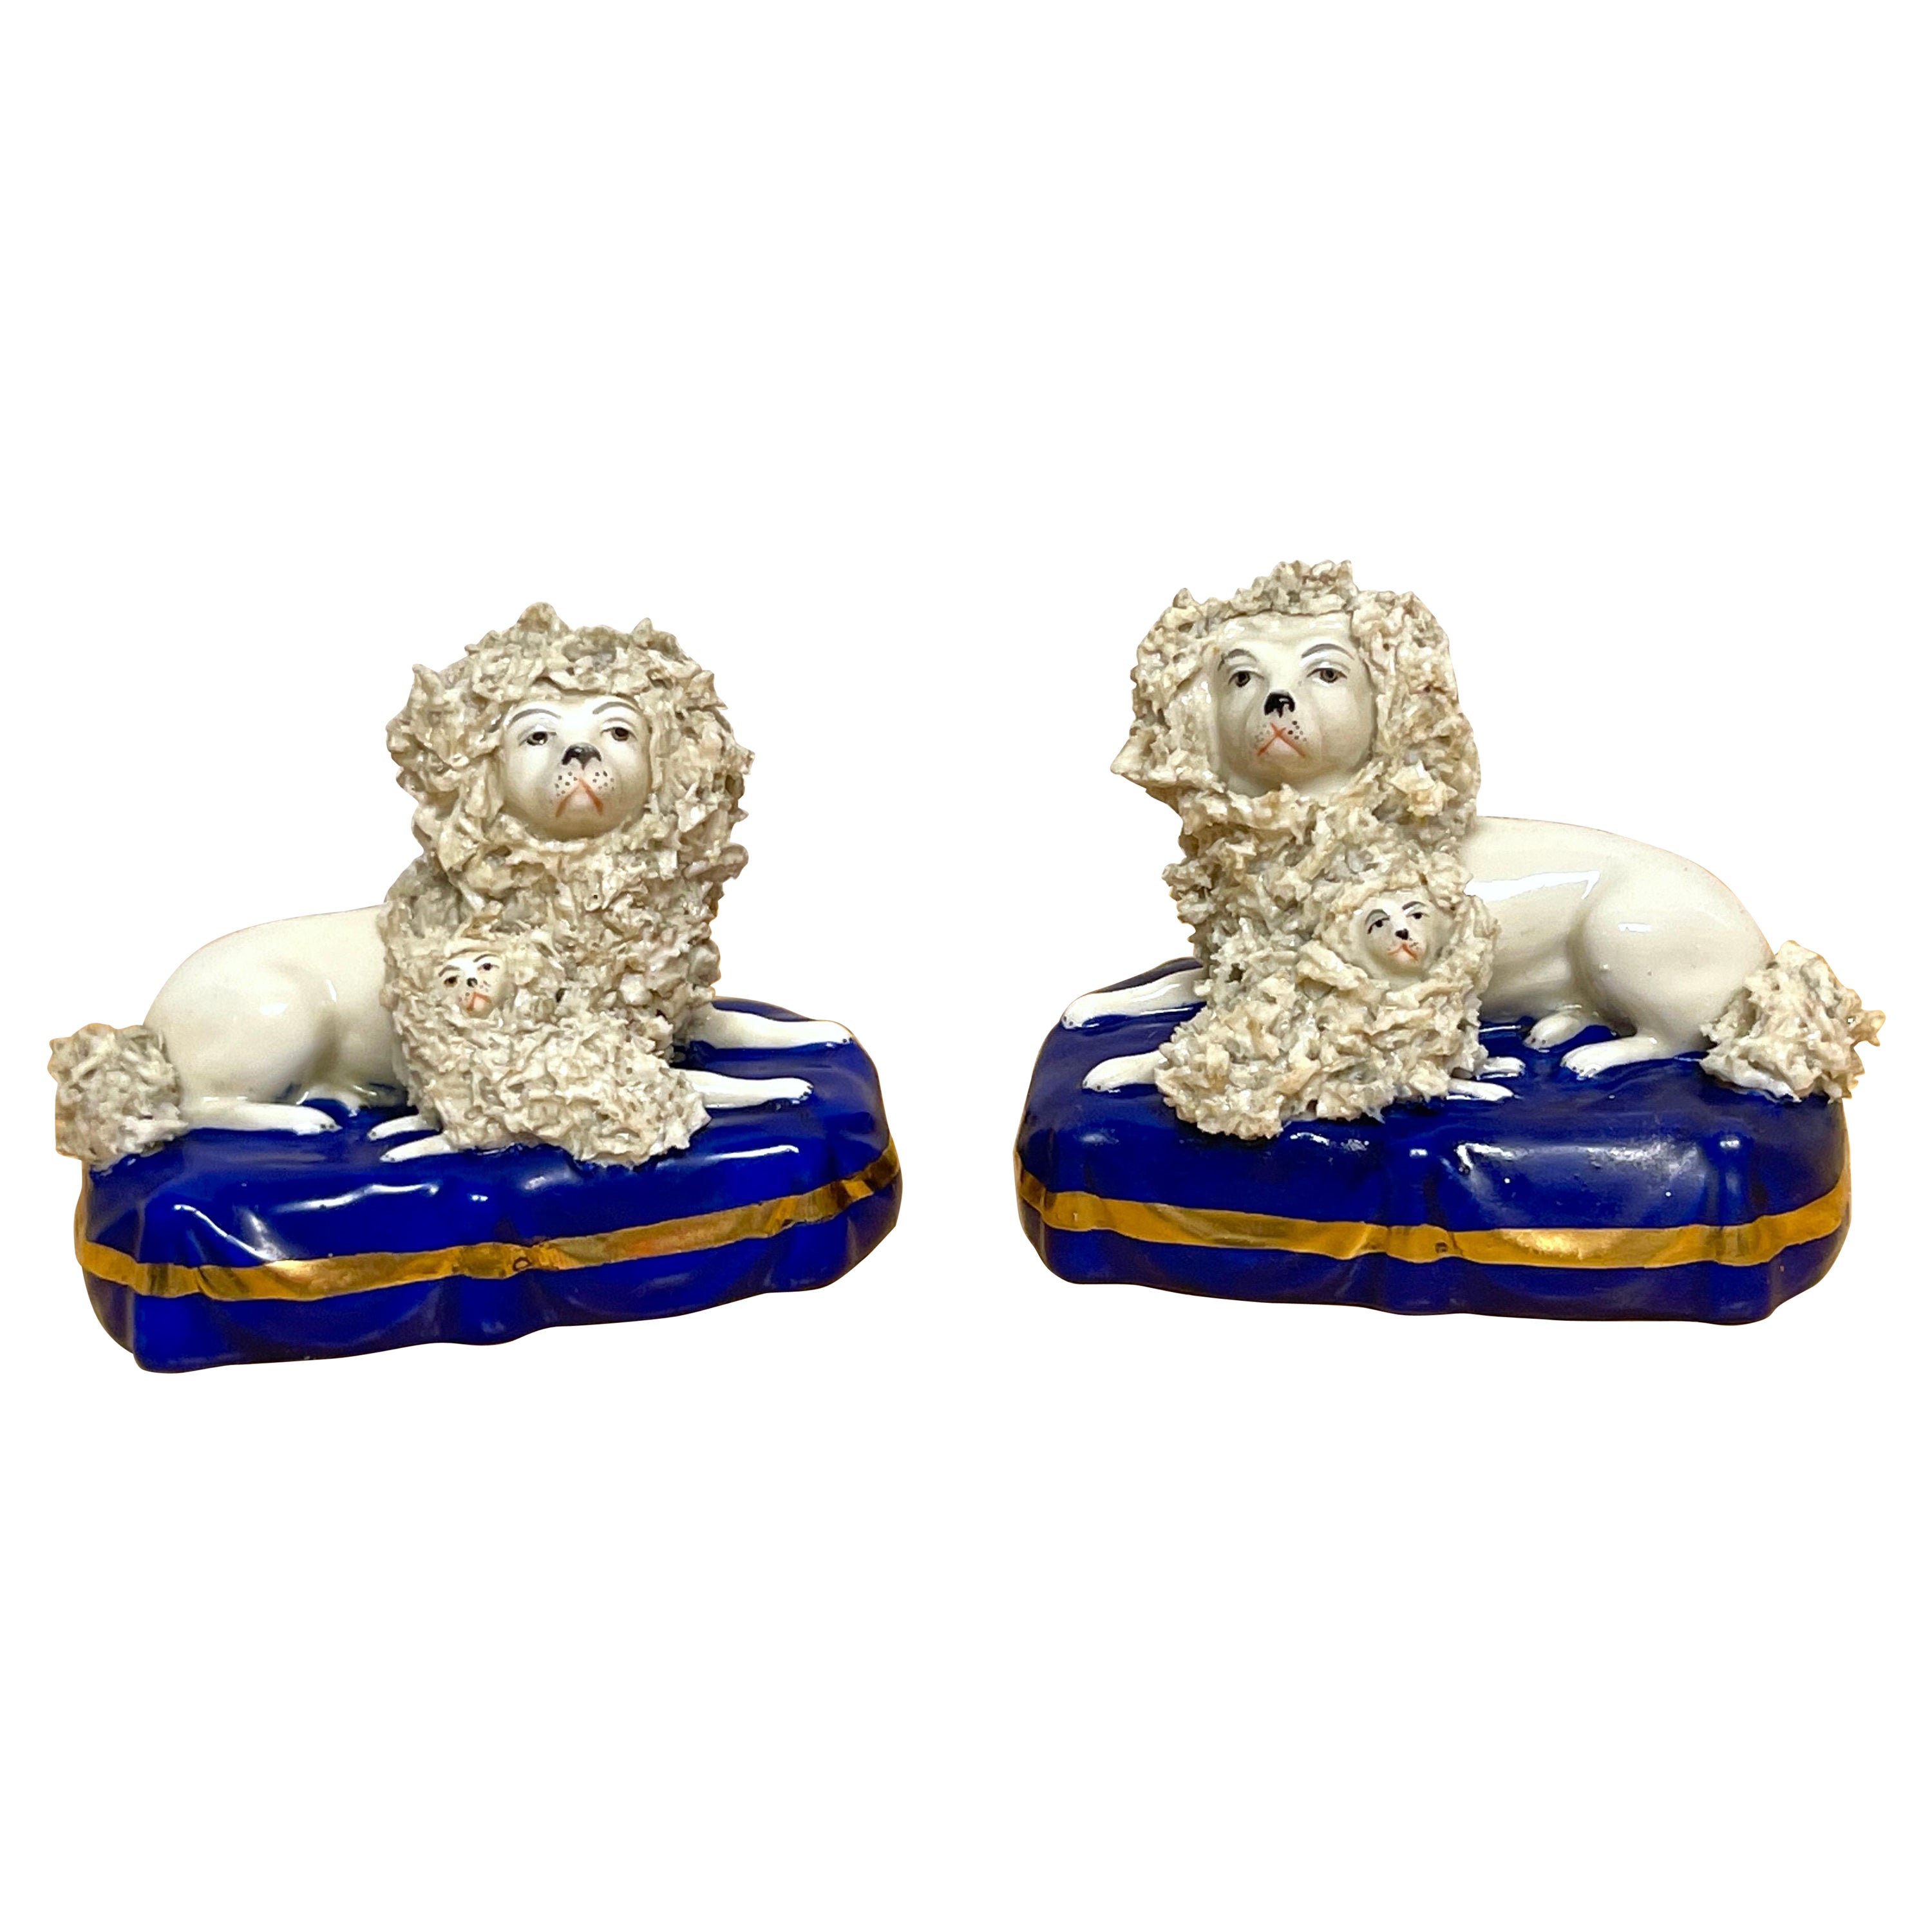 Pair of 19th Century Chelsea Porcelain Figures of Seated Poodles & Pups